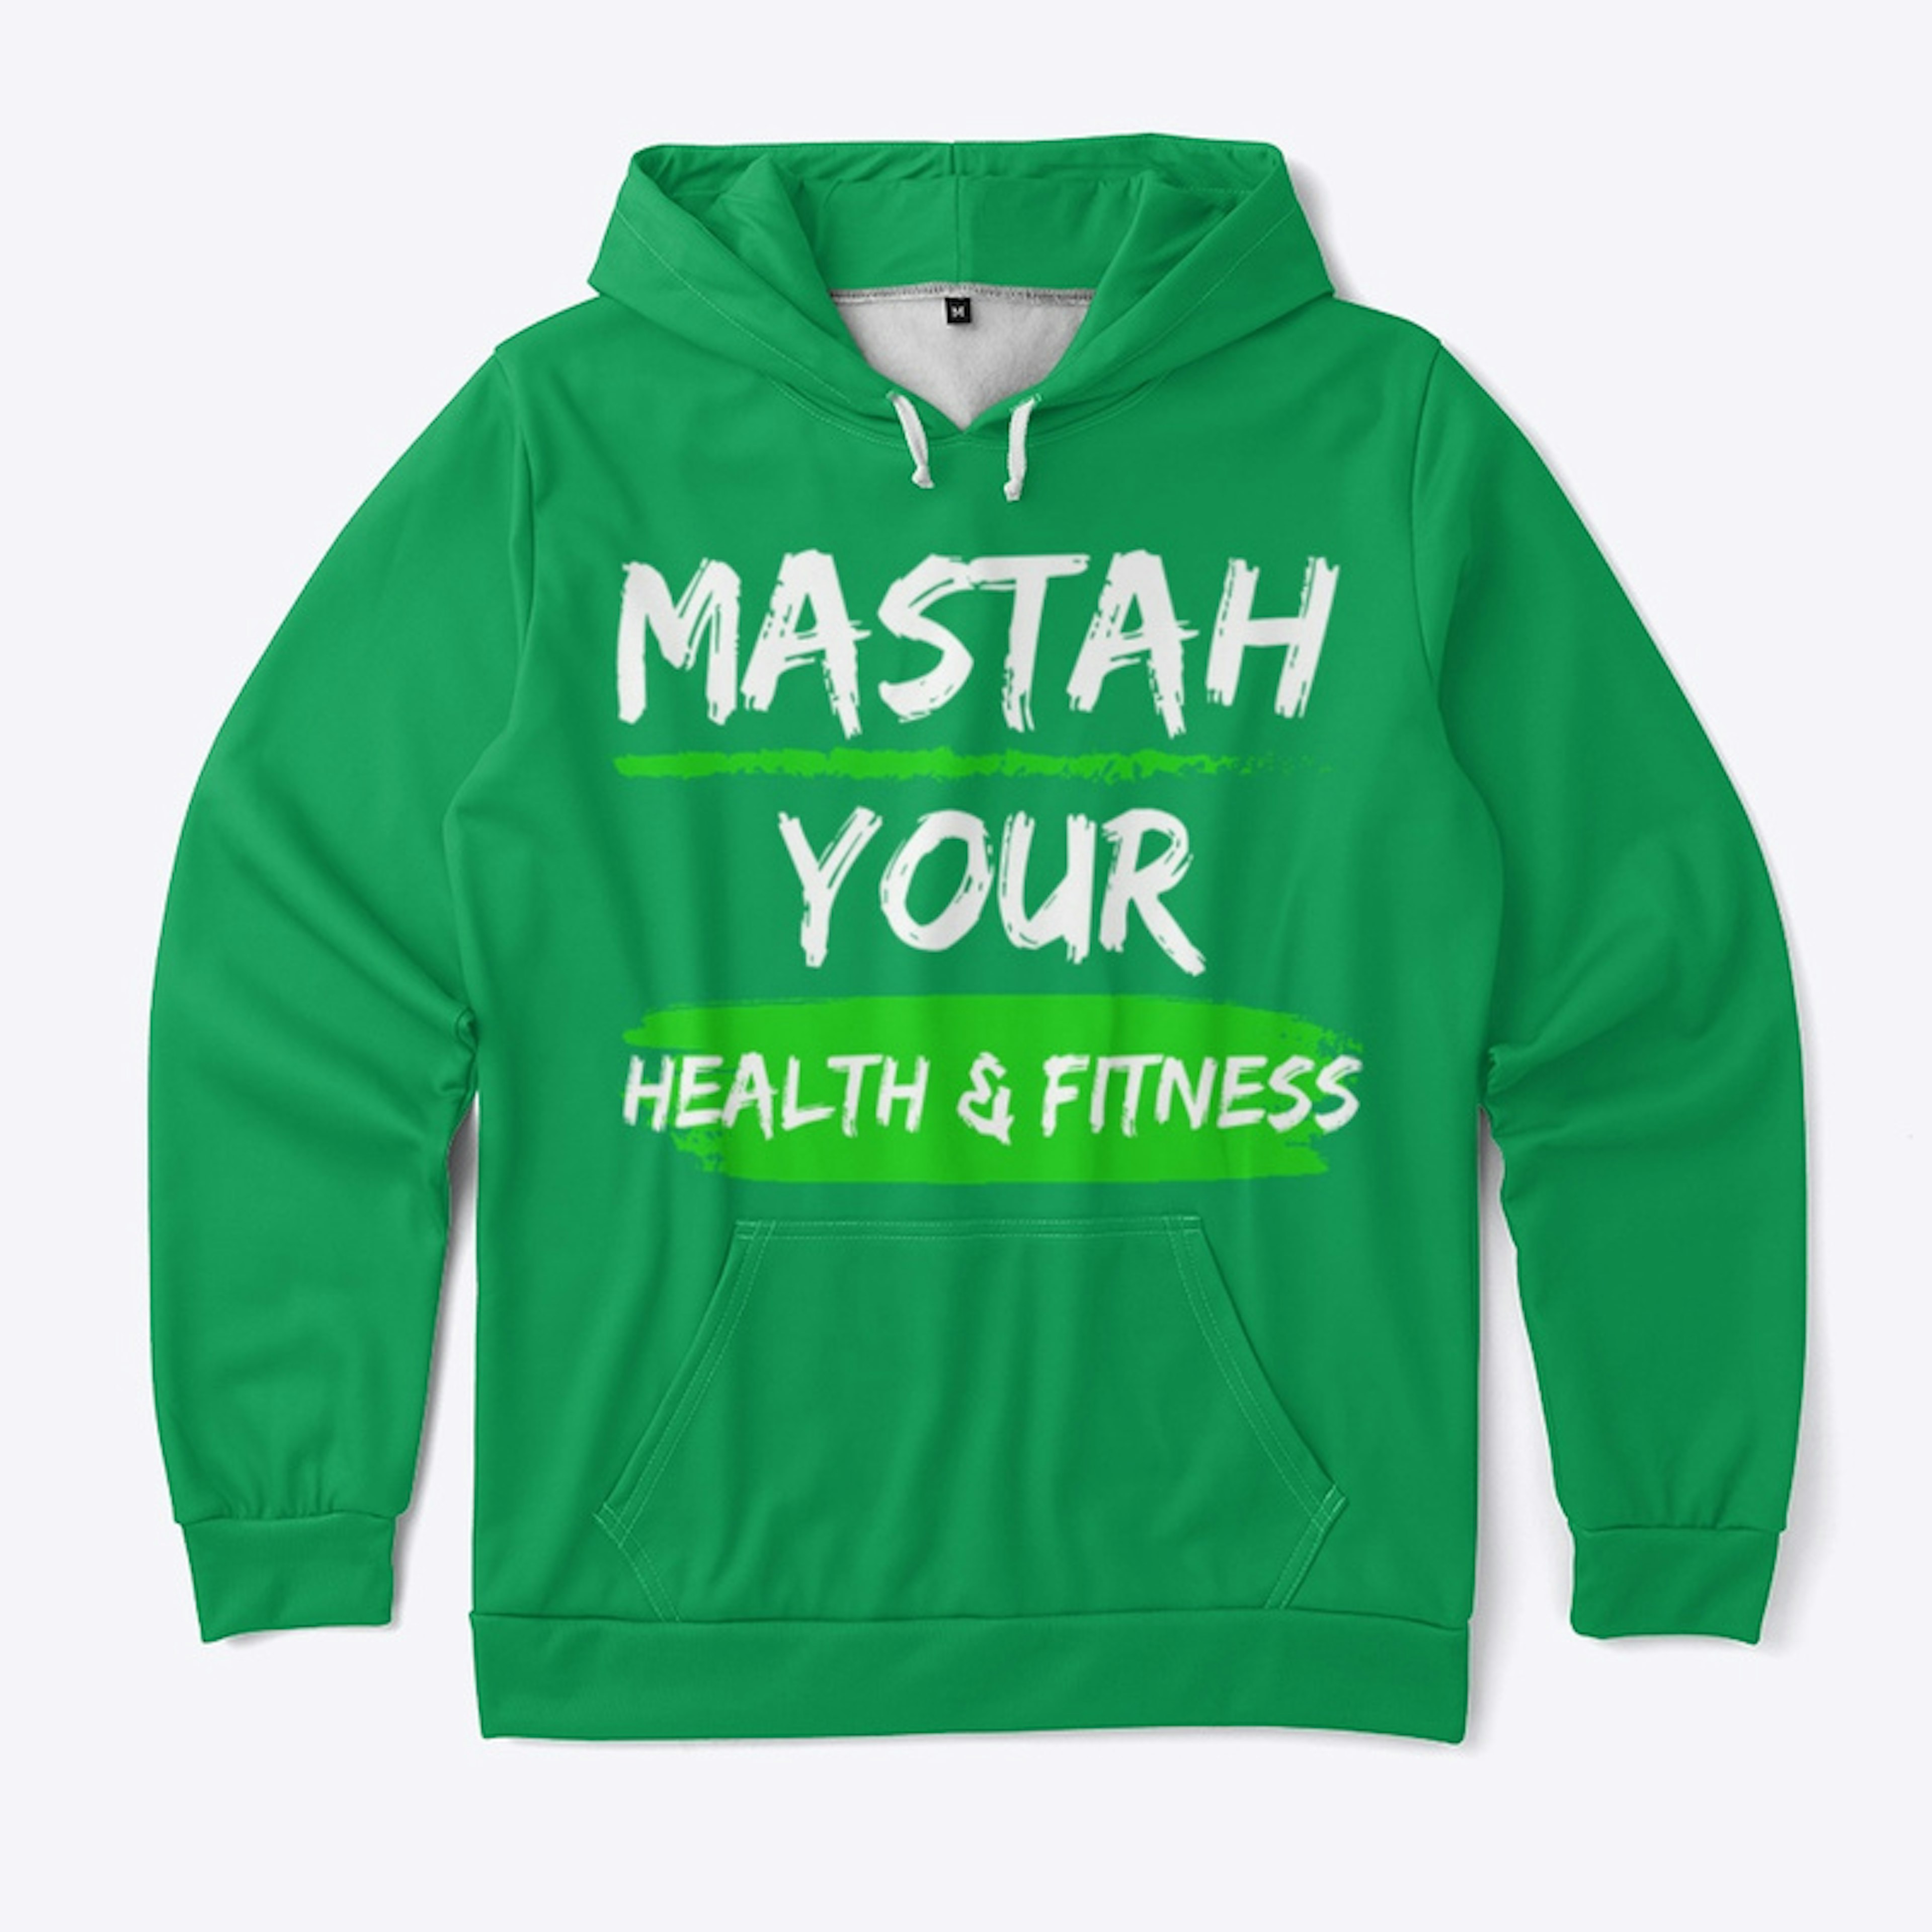 Mastah Your Health and Fitness